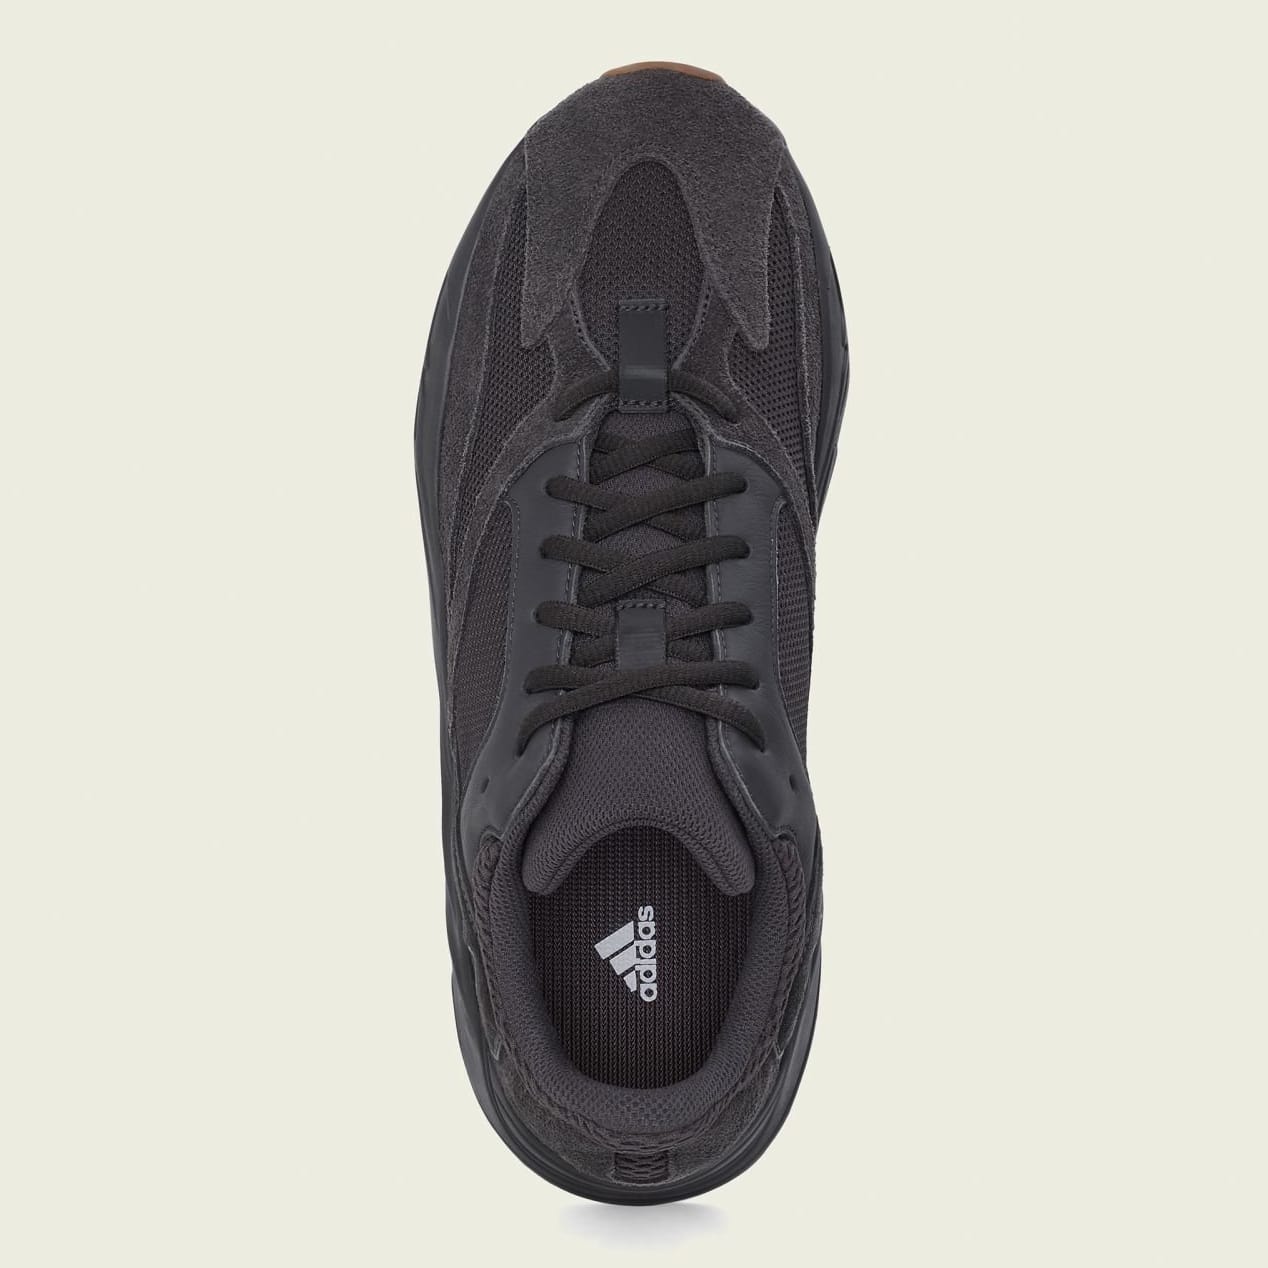 Demon Play munching handicap Adidas Yeezy Boost 700 'Utility Black' Releases This Summer | Complex